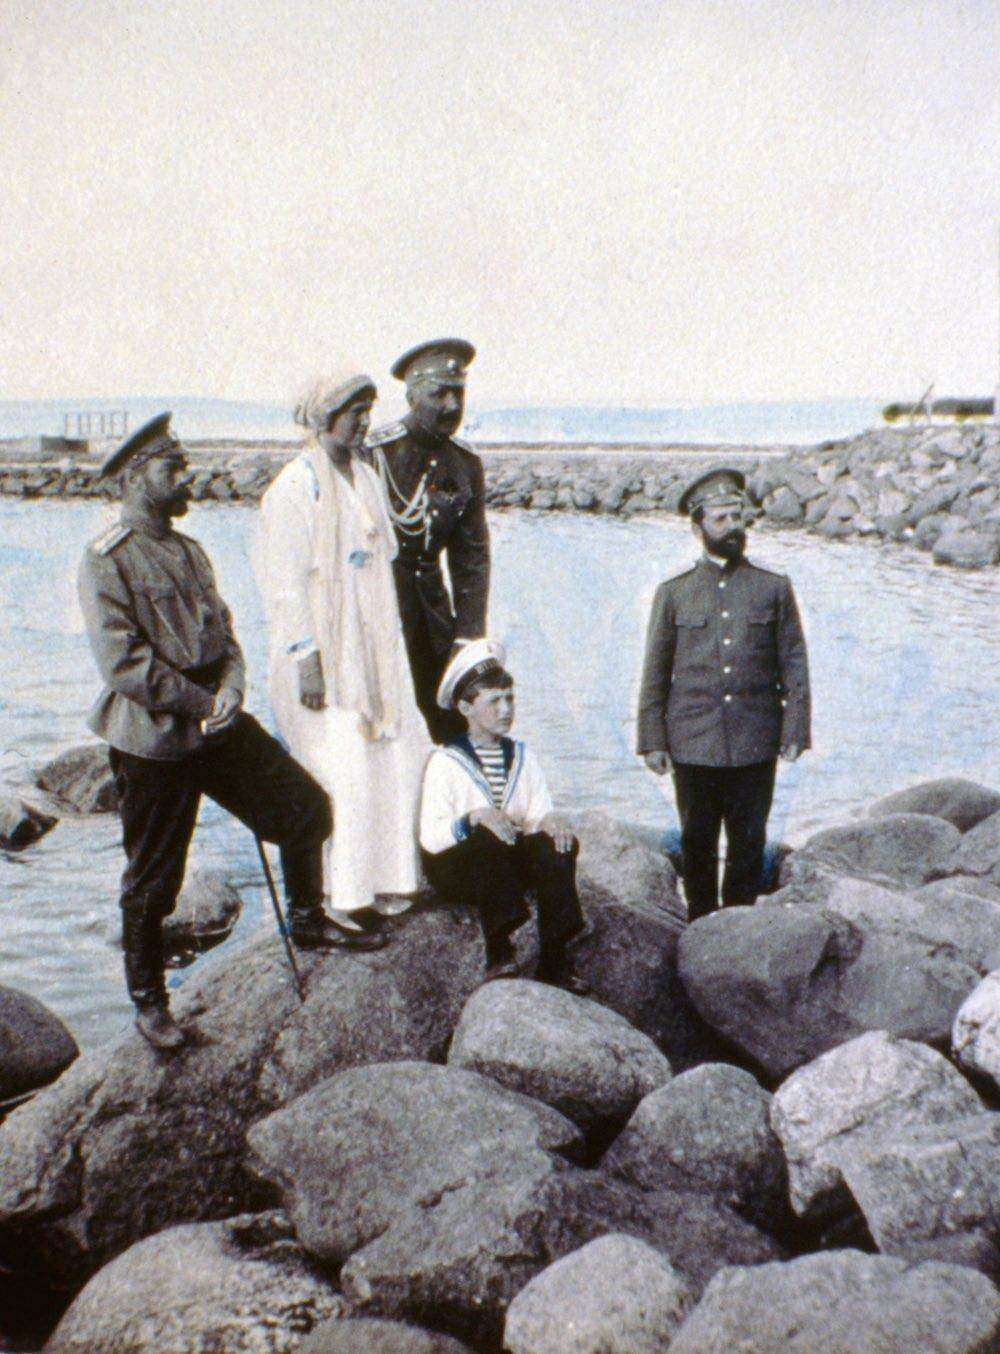 ROPSHA, RUSSIA - 1915: Tsar Nicholas II and family. The series of the unique pictures were taken by the Tsar Nicholas II himself or people close to the royal family. They were realized in 1915-1916, the most terrible years of World War I. Nicholas II was an insatiable photographer. He took special care of pictures, filed them with care in numerous albums. He passed down his love for photography to Maria, his third daughter, who is responsible for colouring most of the pictures. (Photo: Laski Diffusion/Getty Images)